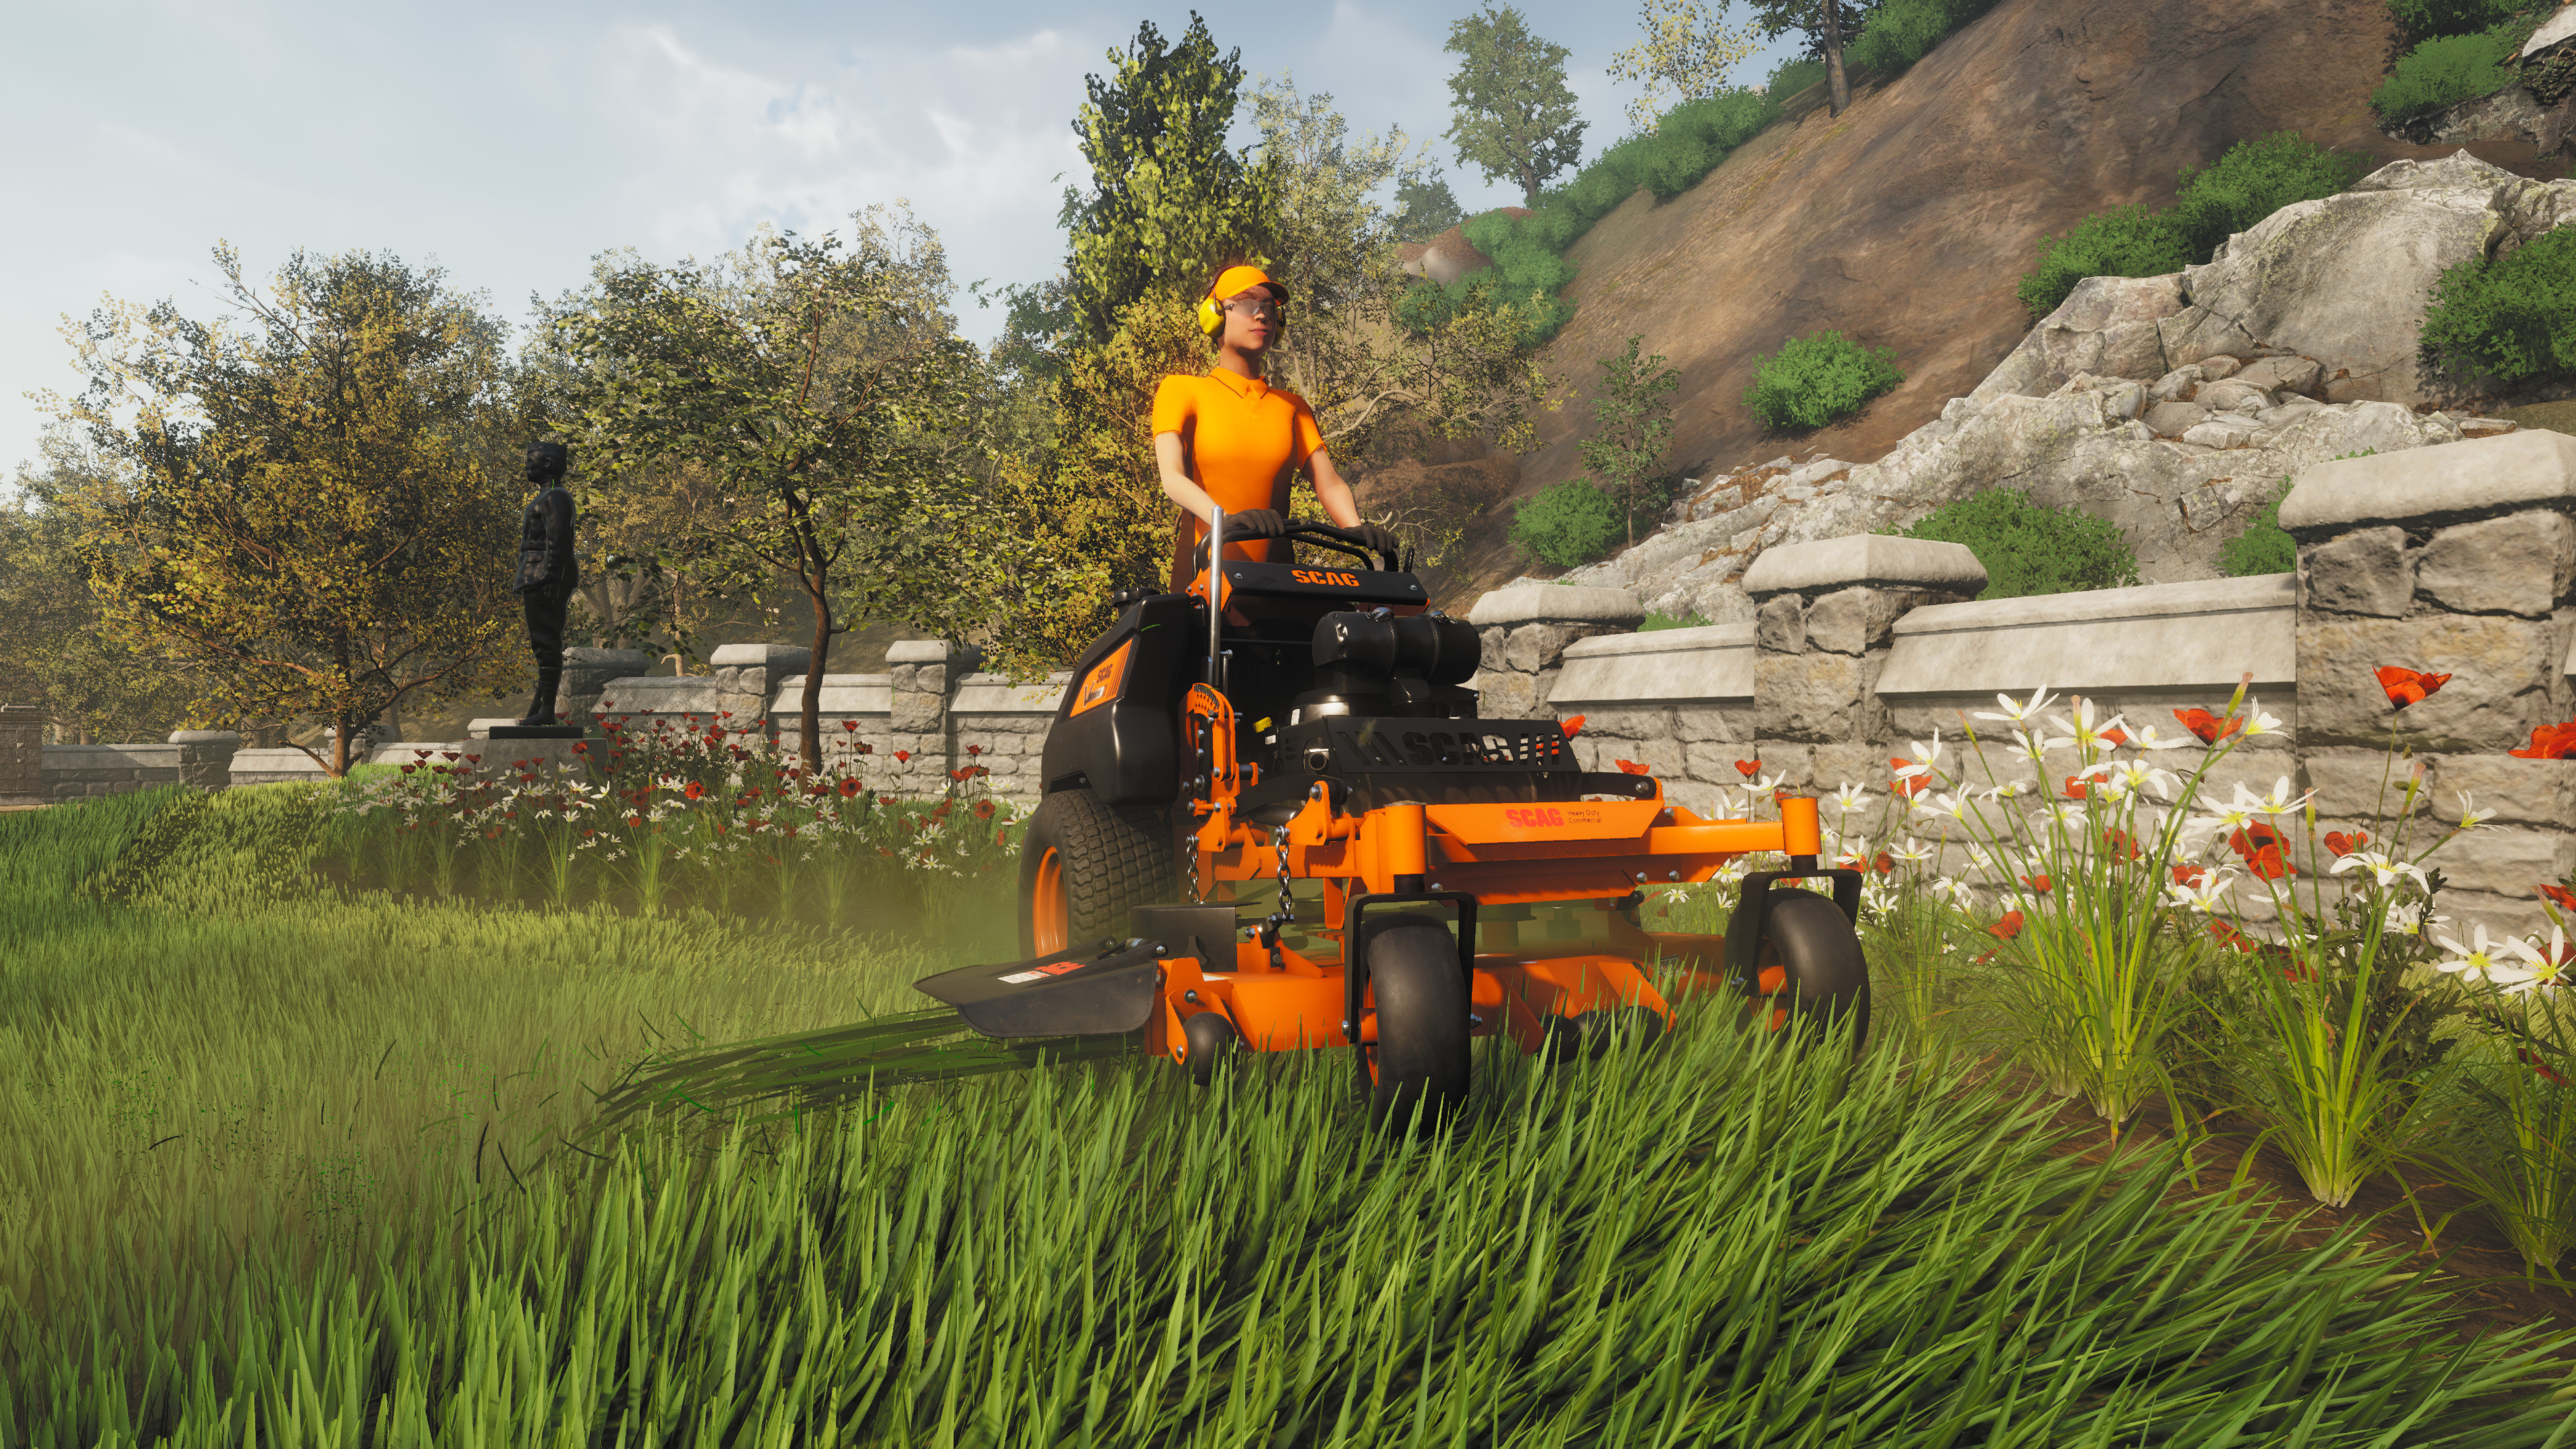 Lawn Mowing Simulator Free Download for PC